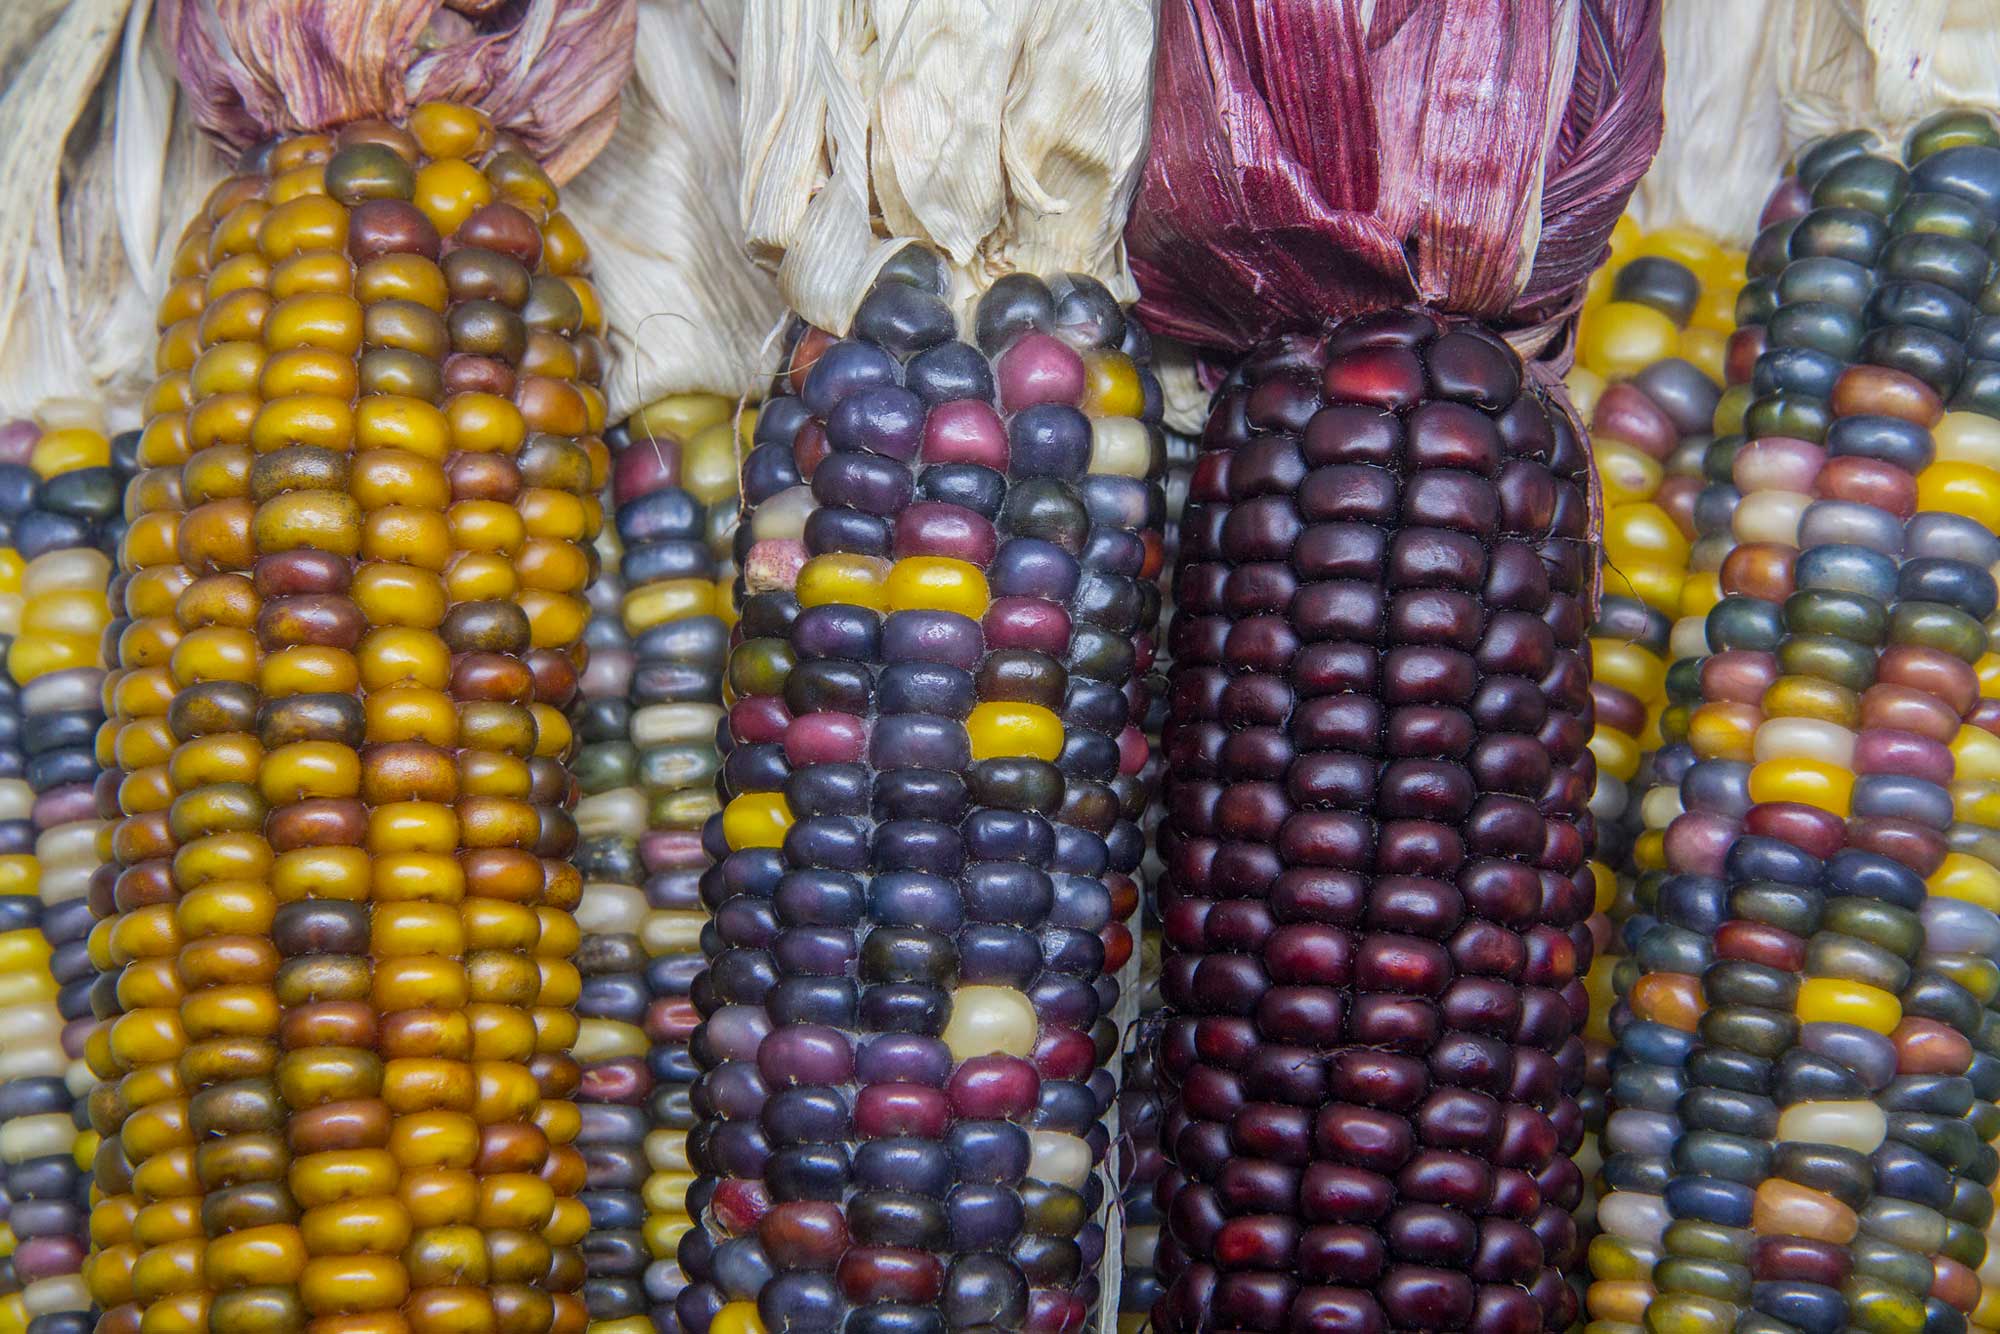 Detail of ears of maize with multicolored kernels, showing variation among different ears. 